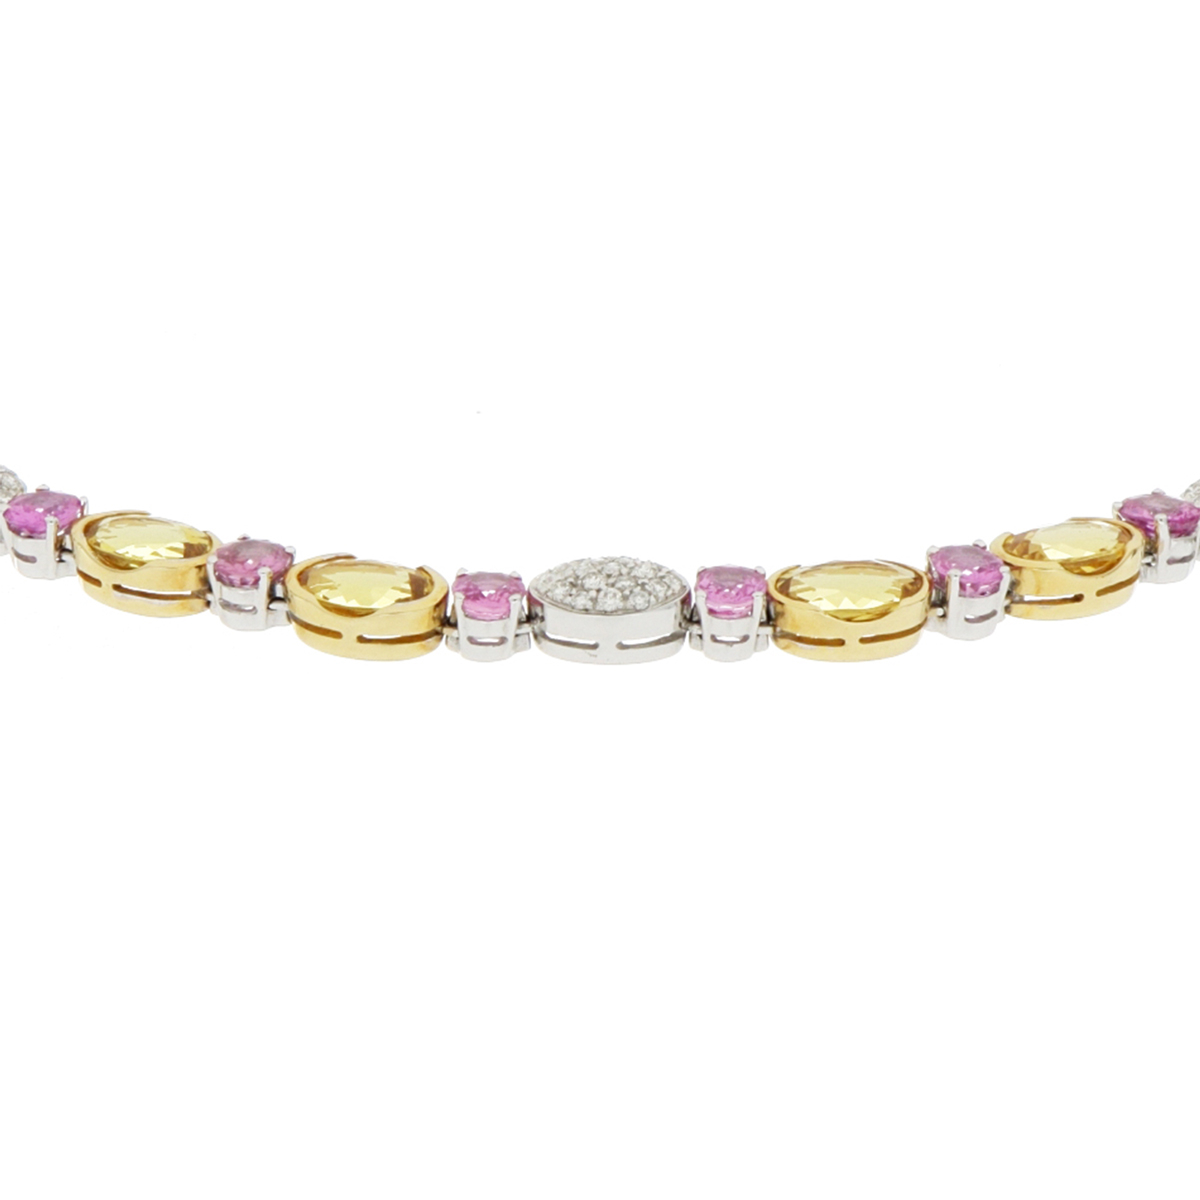 Pink Sapphire and Yellow Beryl Necklace